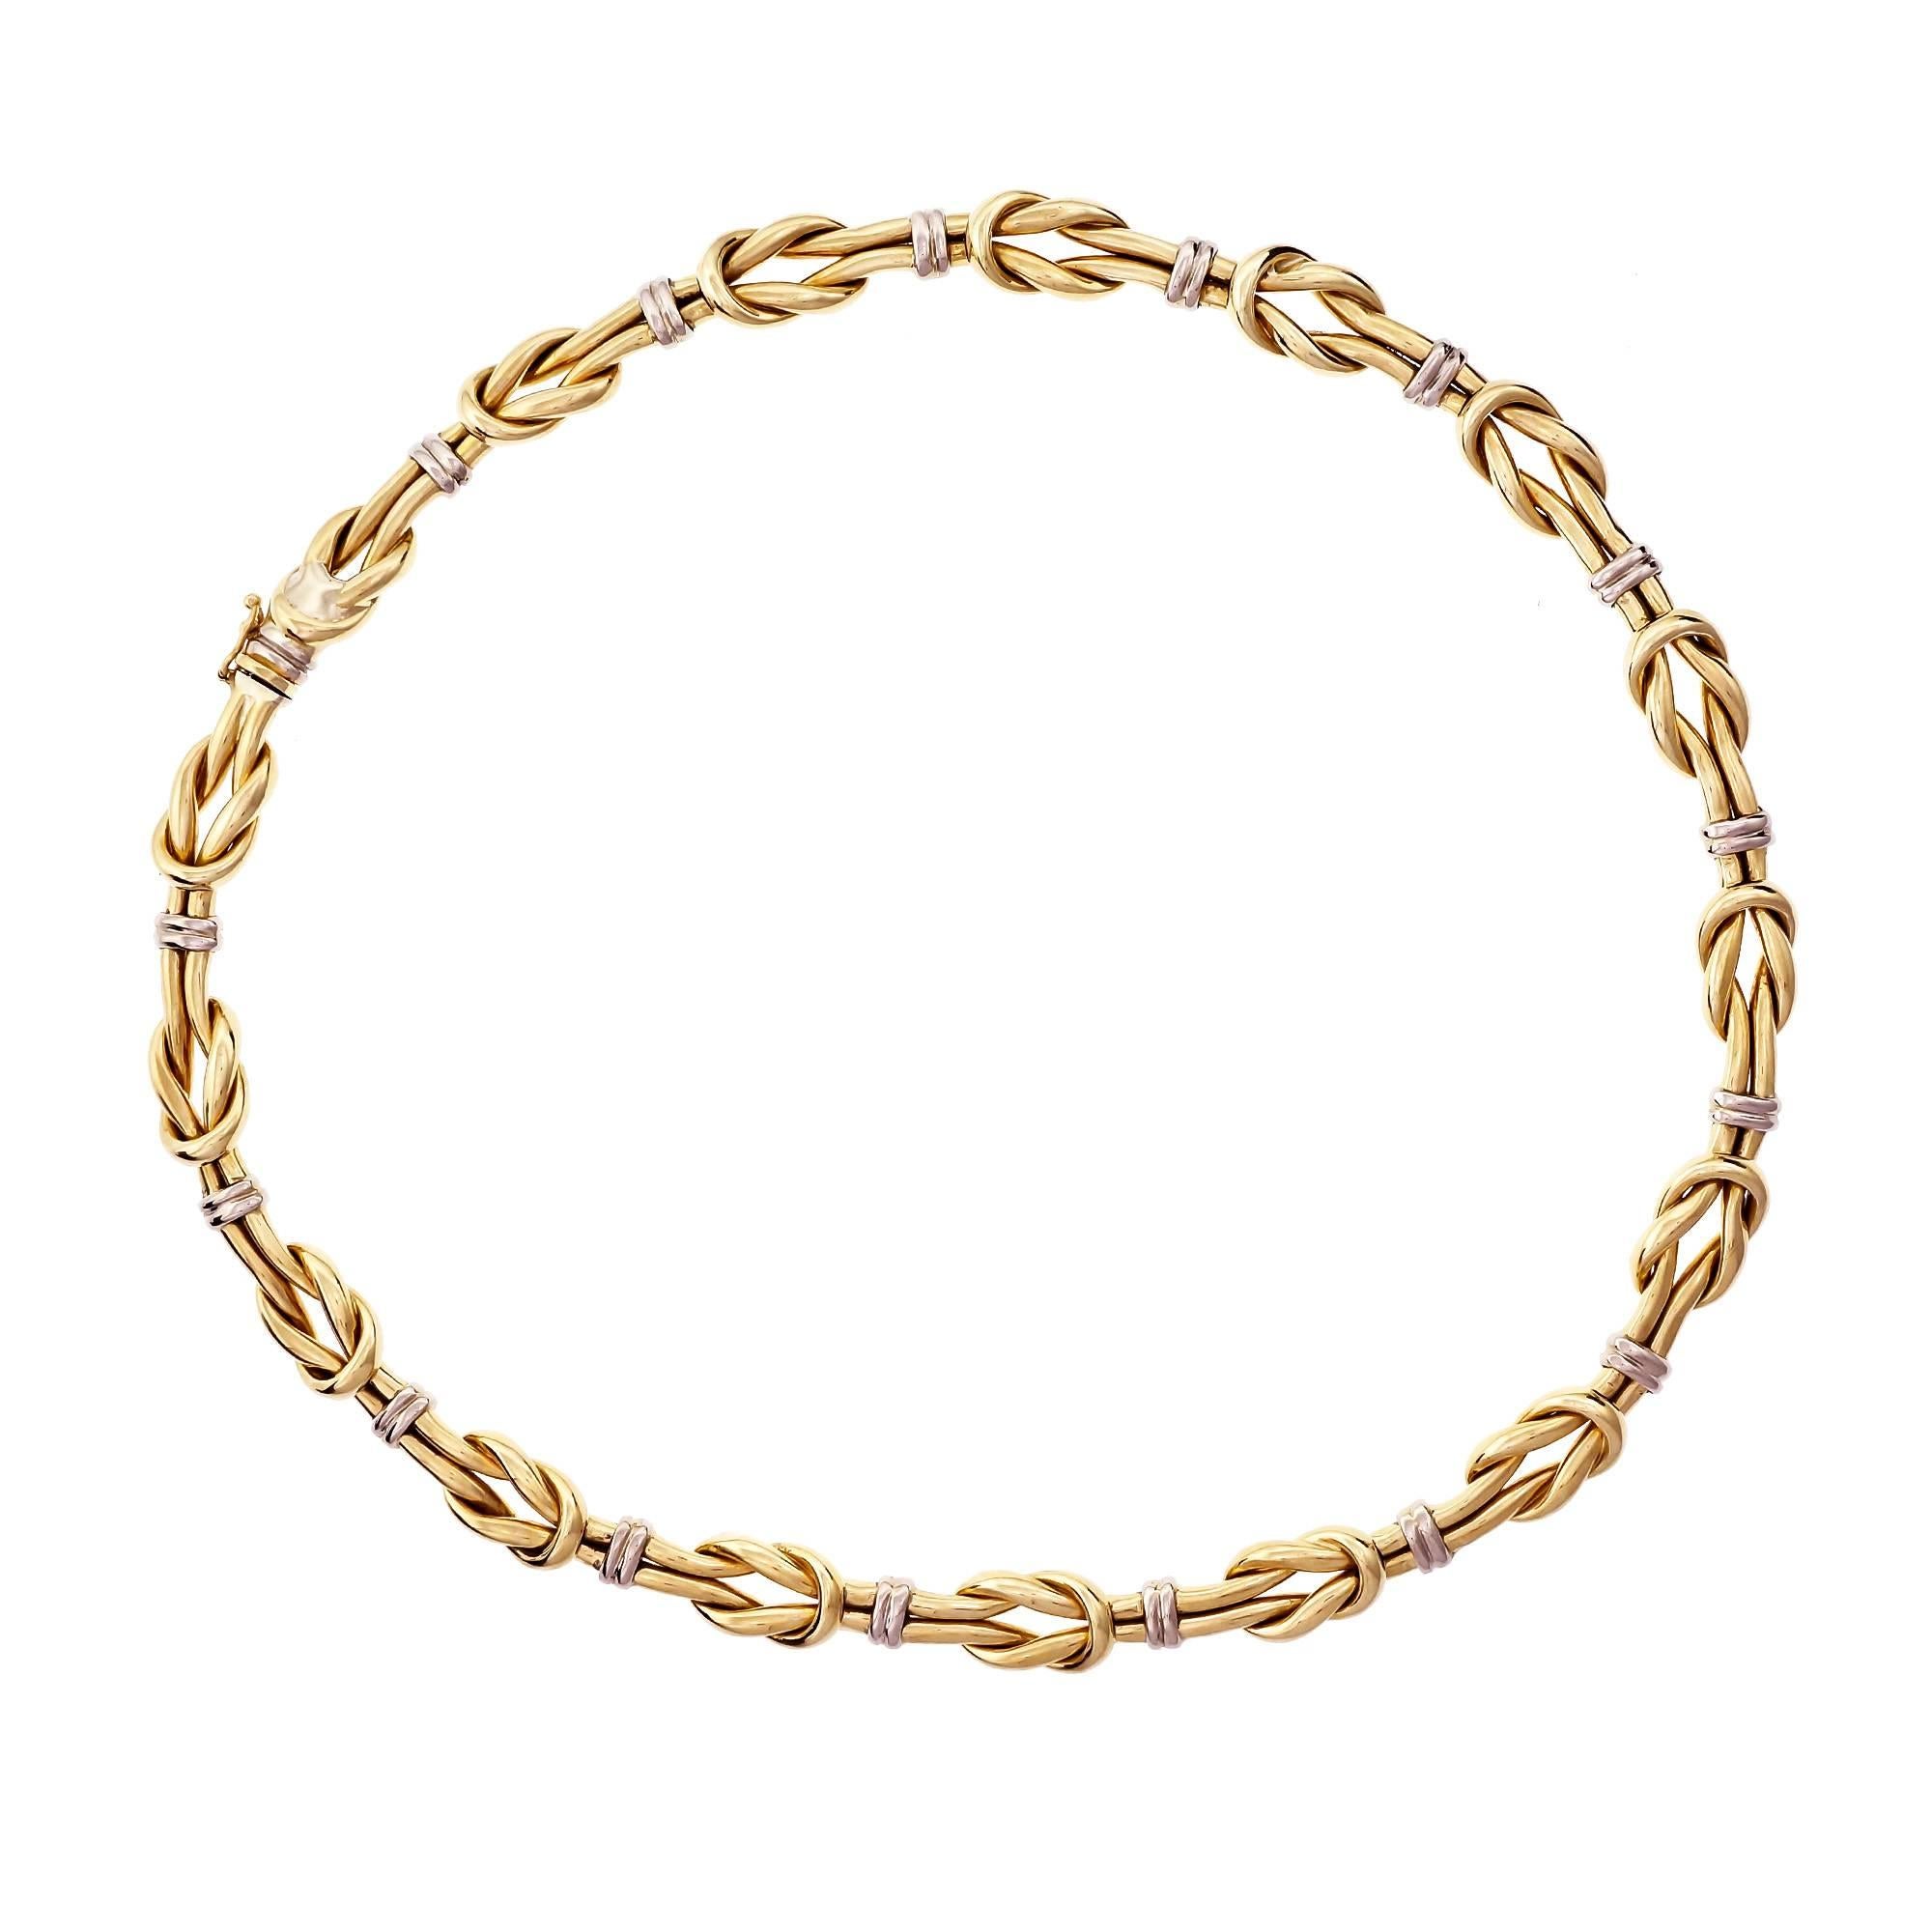 1960s Italian Knot Link Two-Tone Gold Necklace